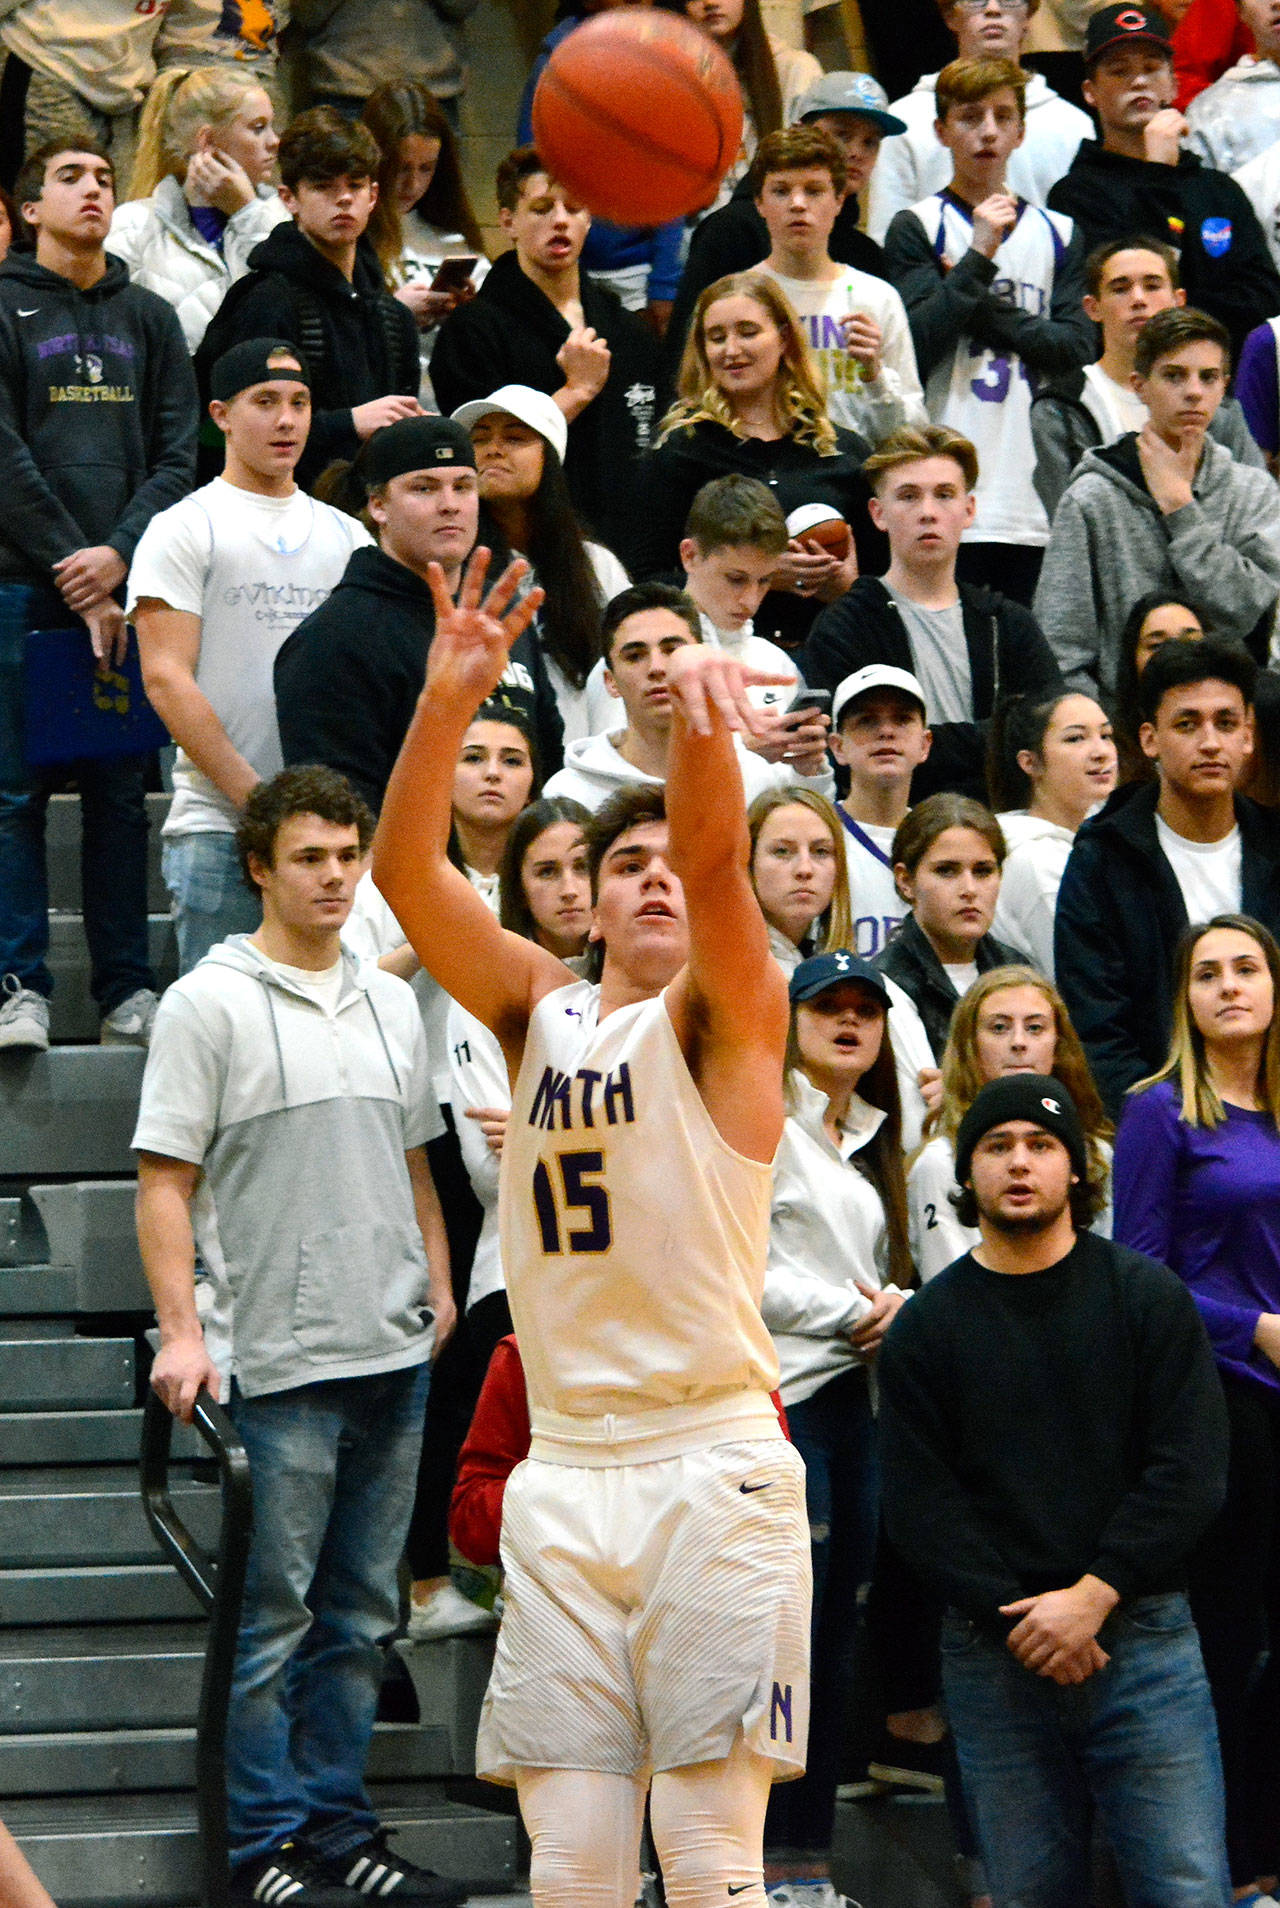 With the crowd behind him, North Kitsap’s Ryan Hecker launches a 3-point attempt against Olympic. The Vikings won the game 63-43. (Mark Krulish/Kitsap News Group)